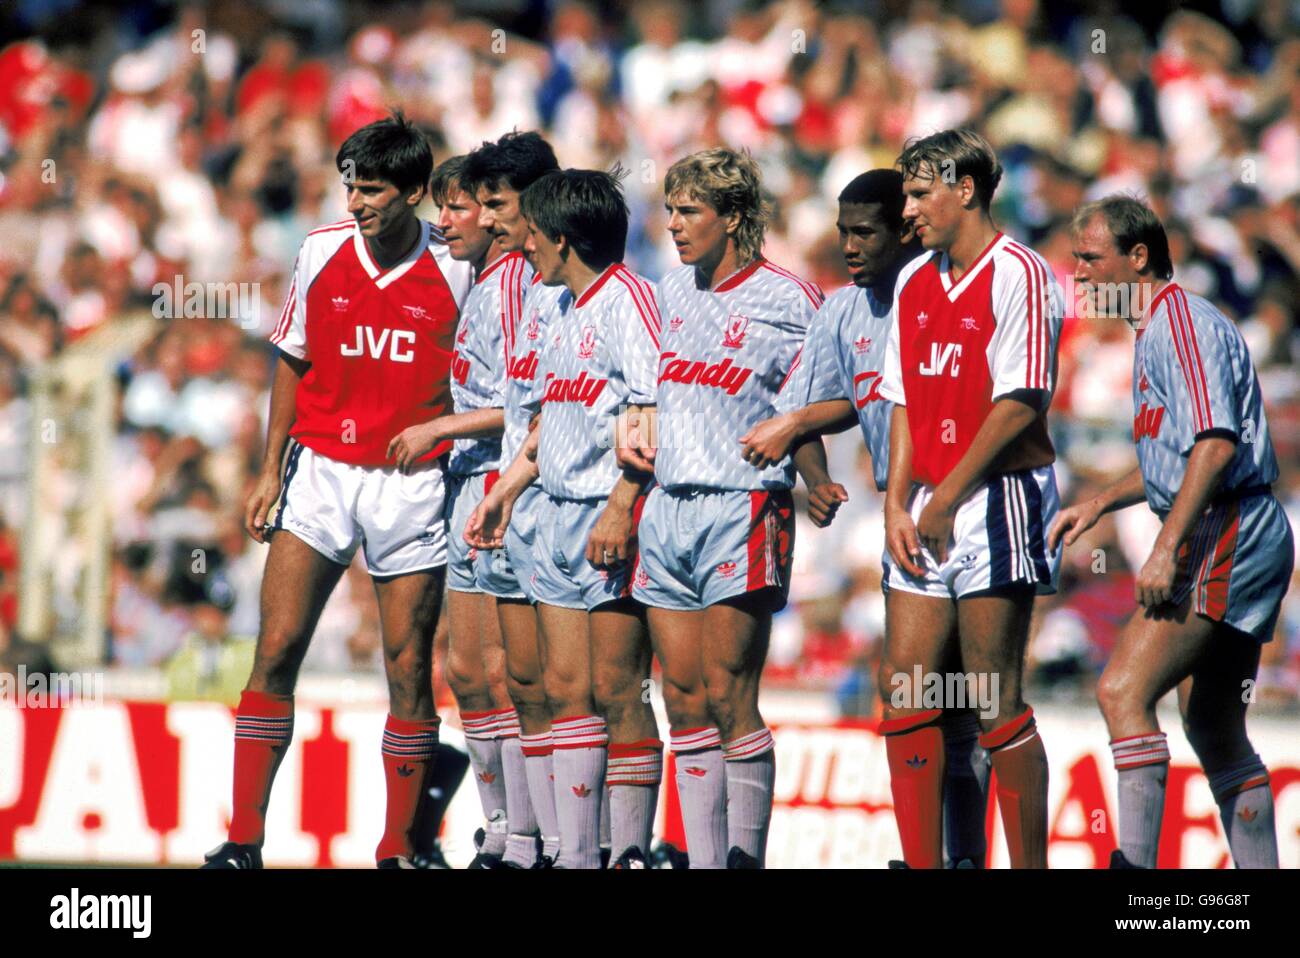 Arsenal's Alan Smith (left) and Paul Merson (second right) infiltrate the Liverpool defensive wall (l-r): Ronnie Whelan, Ian Rush, Peter Beardsley, Barry Venison, John Barnes, Steve McMahon Stock Photo